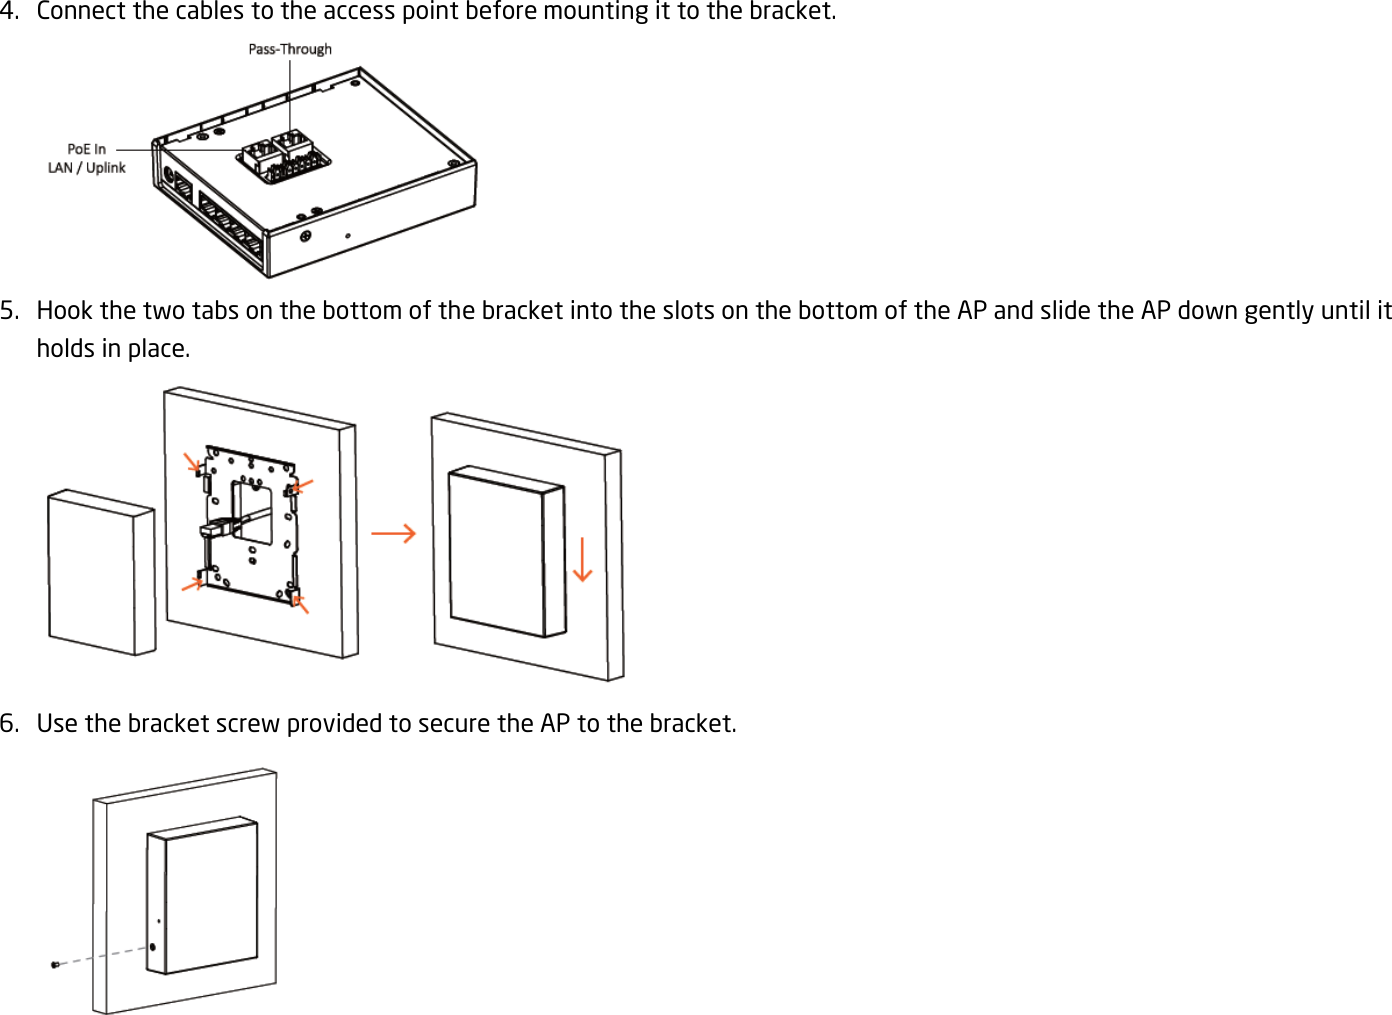 4. Connect the cables to the access point before mounting it to the bracket.  5. Hook the two tabs on the bottom of the bracket into the slots on the bottom of the AP and slide the AP down gently until it holds in place.  6. Use the bracket screw provided to secure the AP to the bracket.  